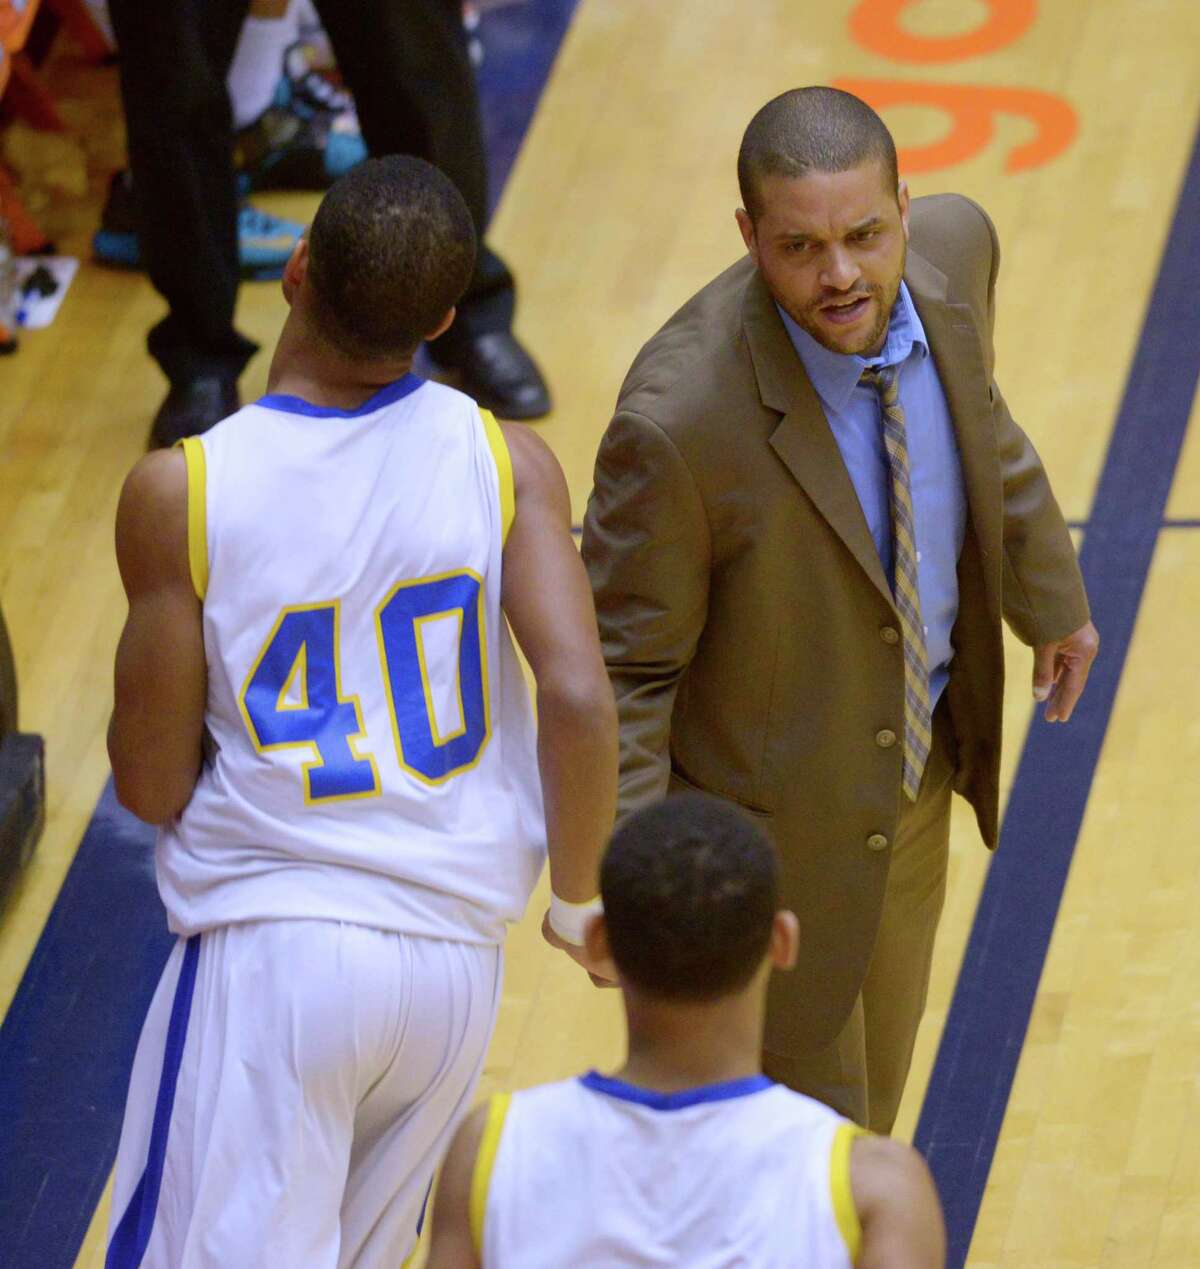 Clemens coach Clifton Ellis greets Frank Harris during the Region IV-6A final against Alexander at the UTSA Convocation Center on Saturday, March 7, 2015.